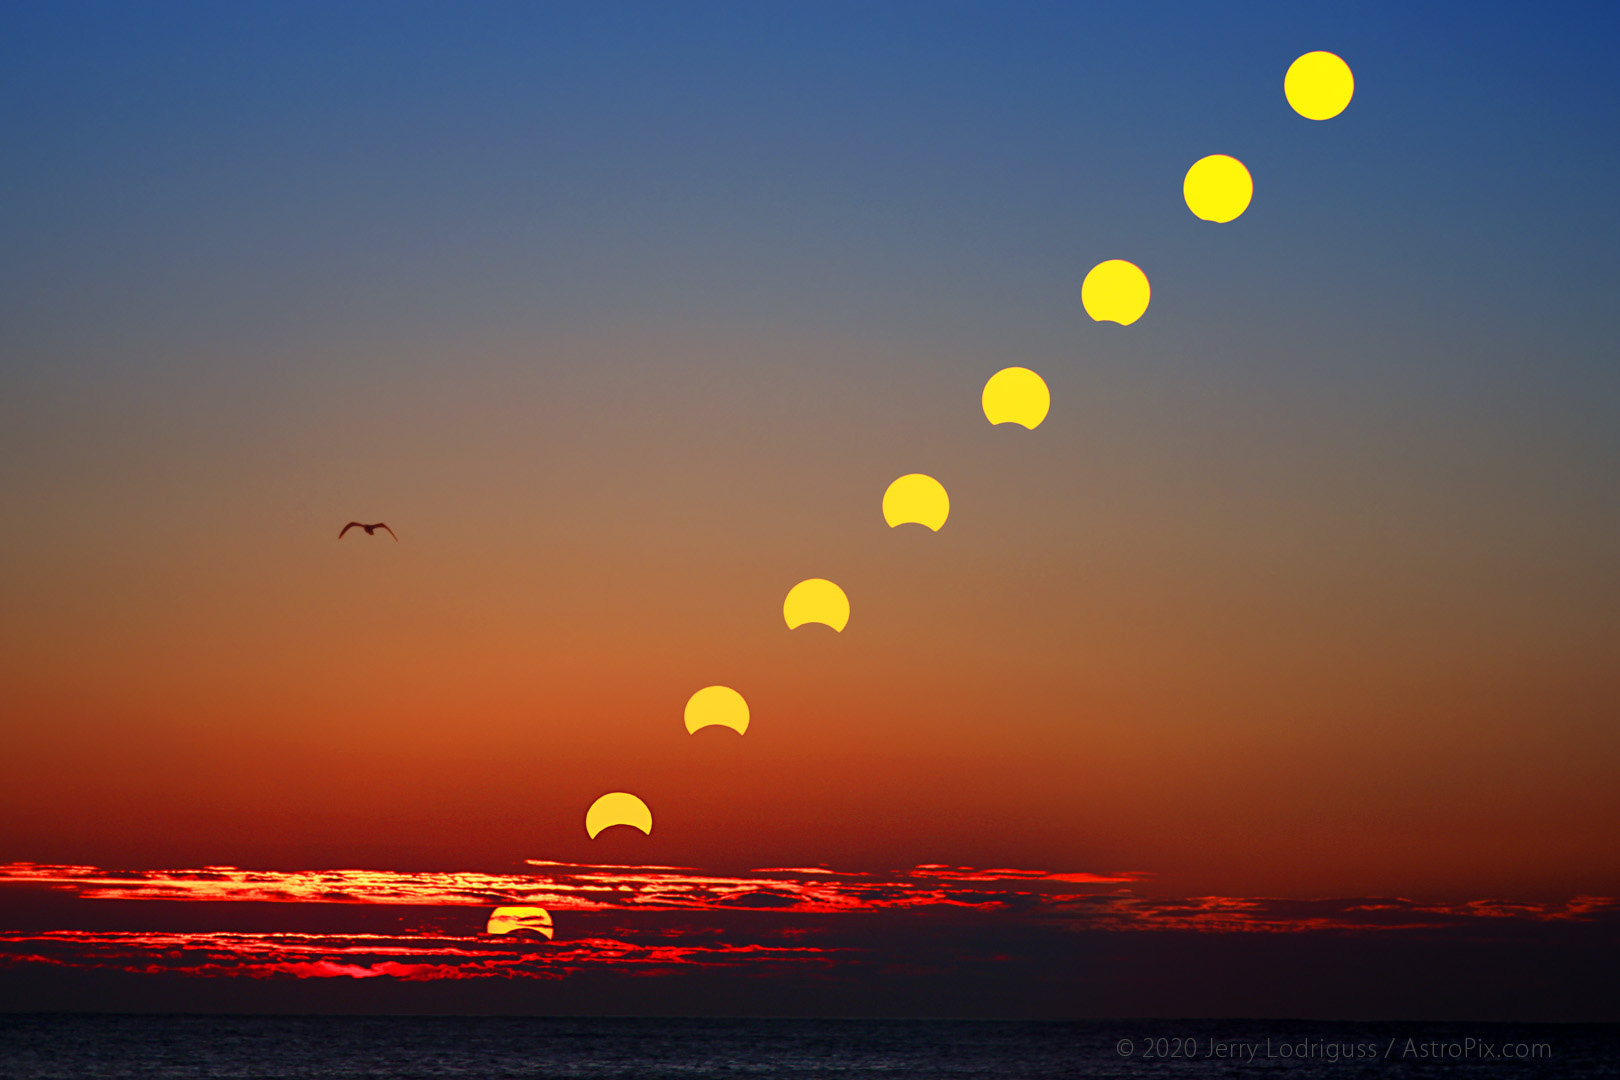 The Sun rises partially eclipsed out of a cloud bank over the Atlantic ocean on November 3, 2013 in this multiple exposure digital composite image.